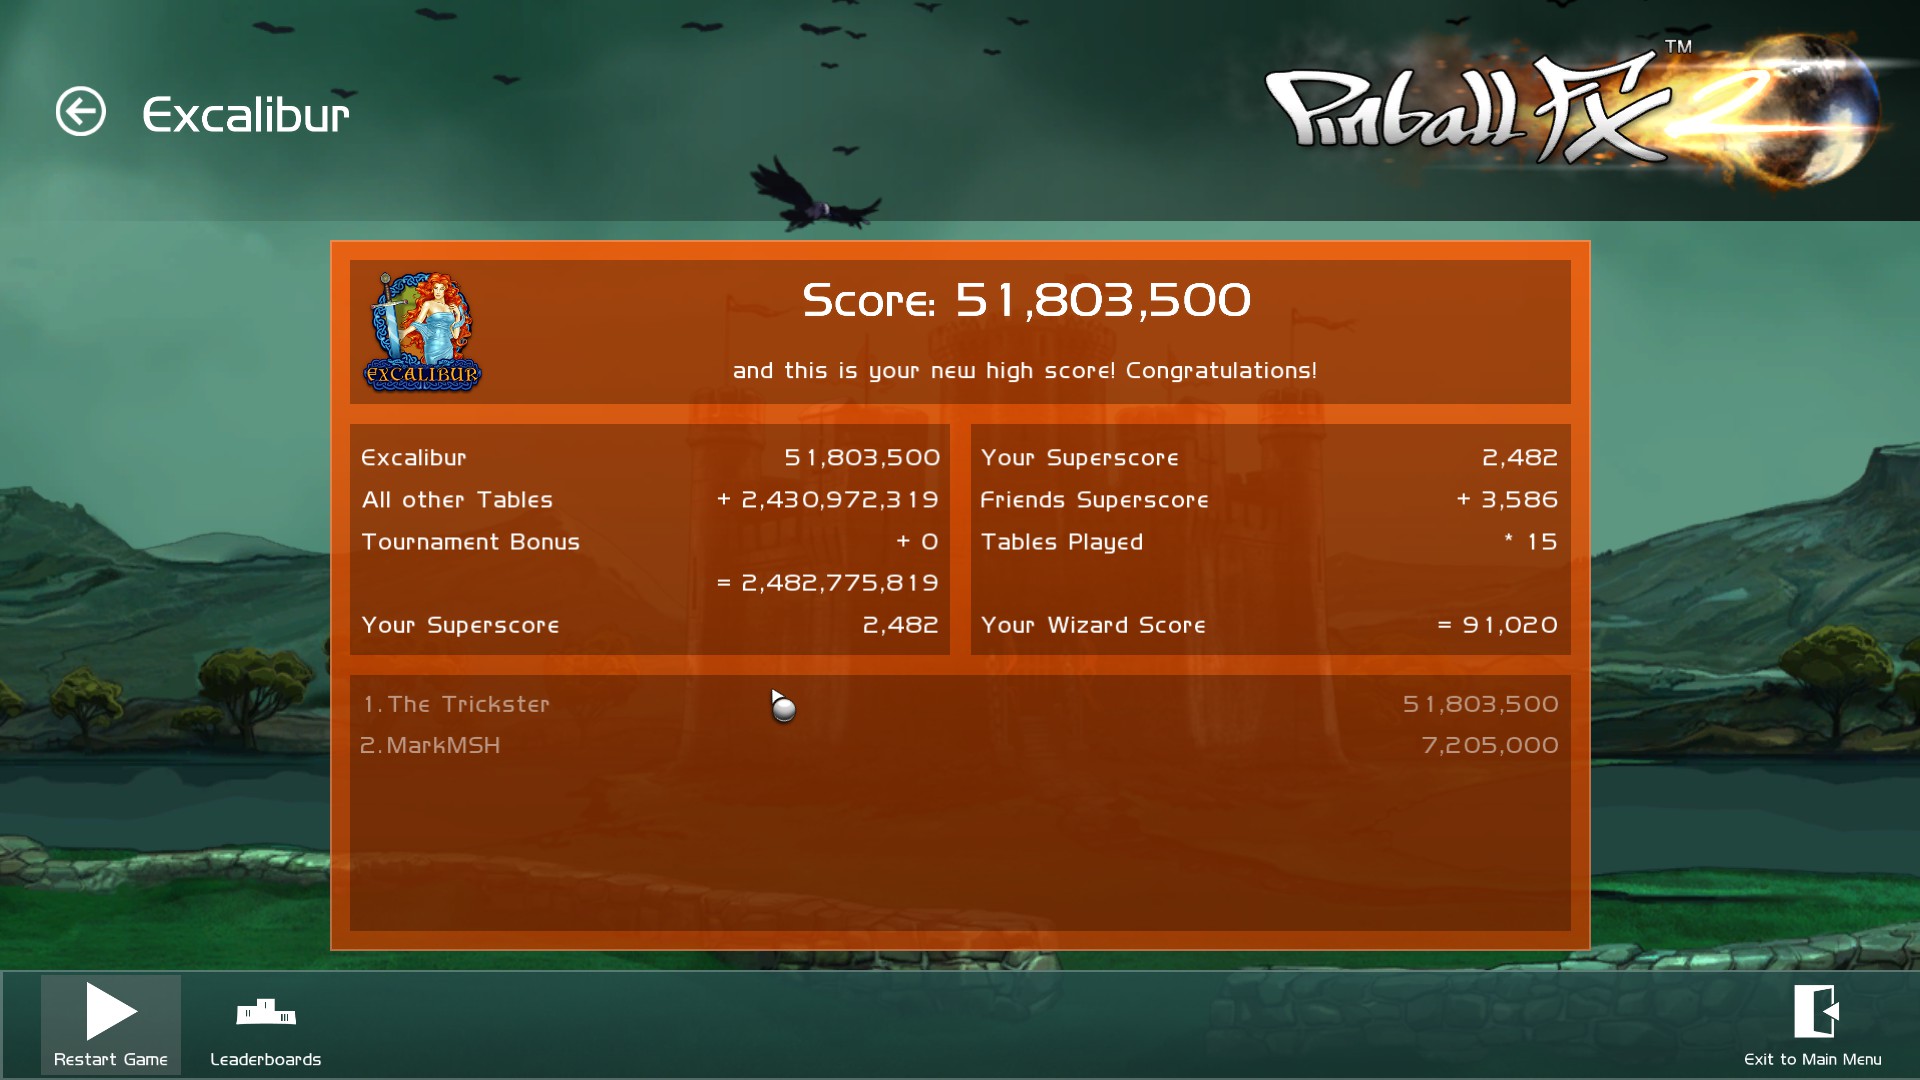 TheTrickster: Pinball FX 2: Excalibur (PC) 51,803,500 points on 2015-12-15 05:11:15